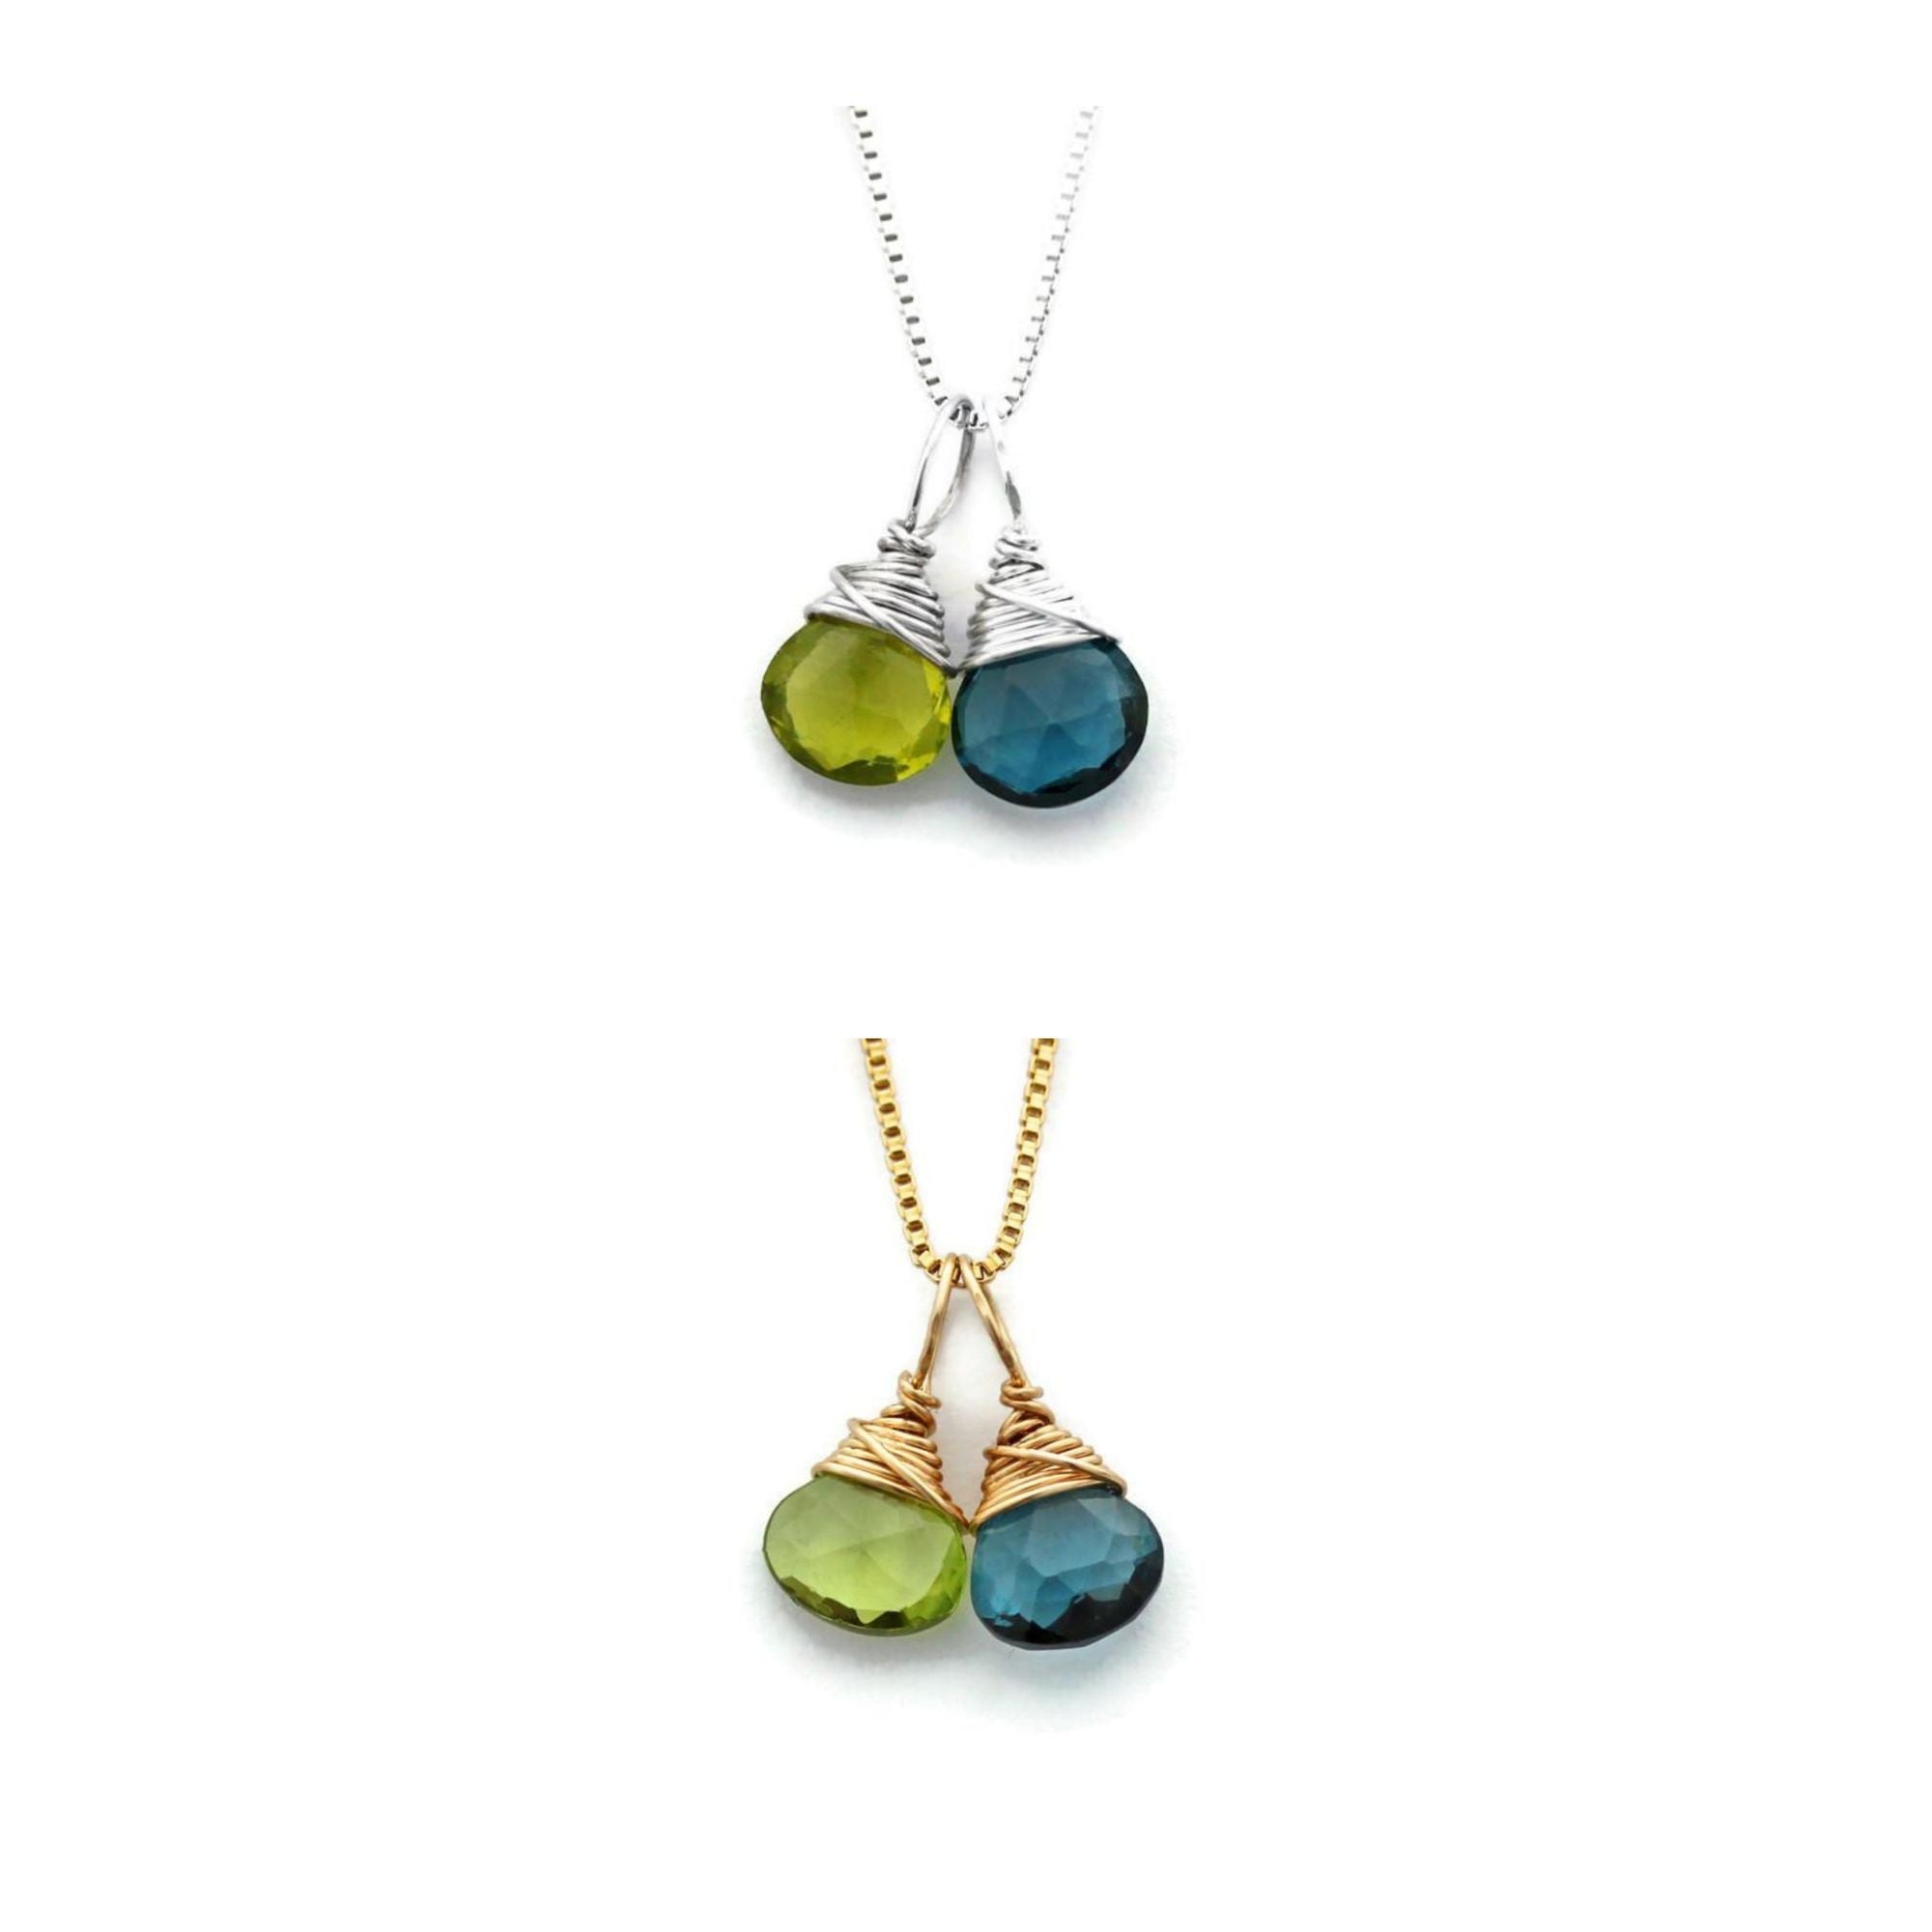 Stuller Birthstone Necklace 653498:641:P PL - Necklaces | Morin Jewelers |  Southbridge, MA